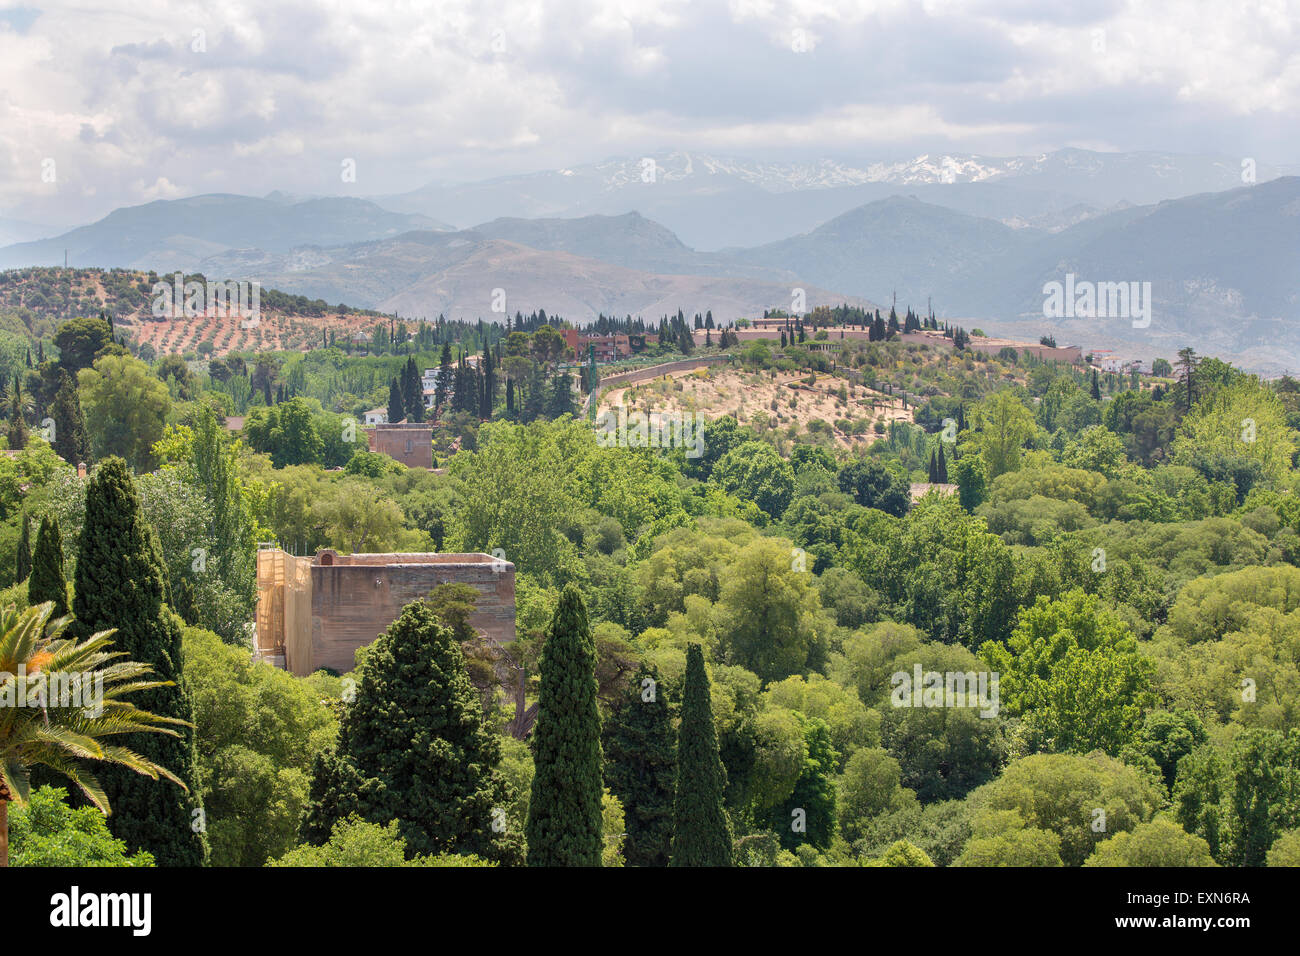 Granada - The outlook from Alhambra palace to Sierra Nevada mountains. Stock Photo